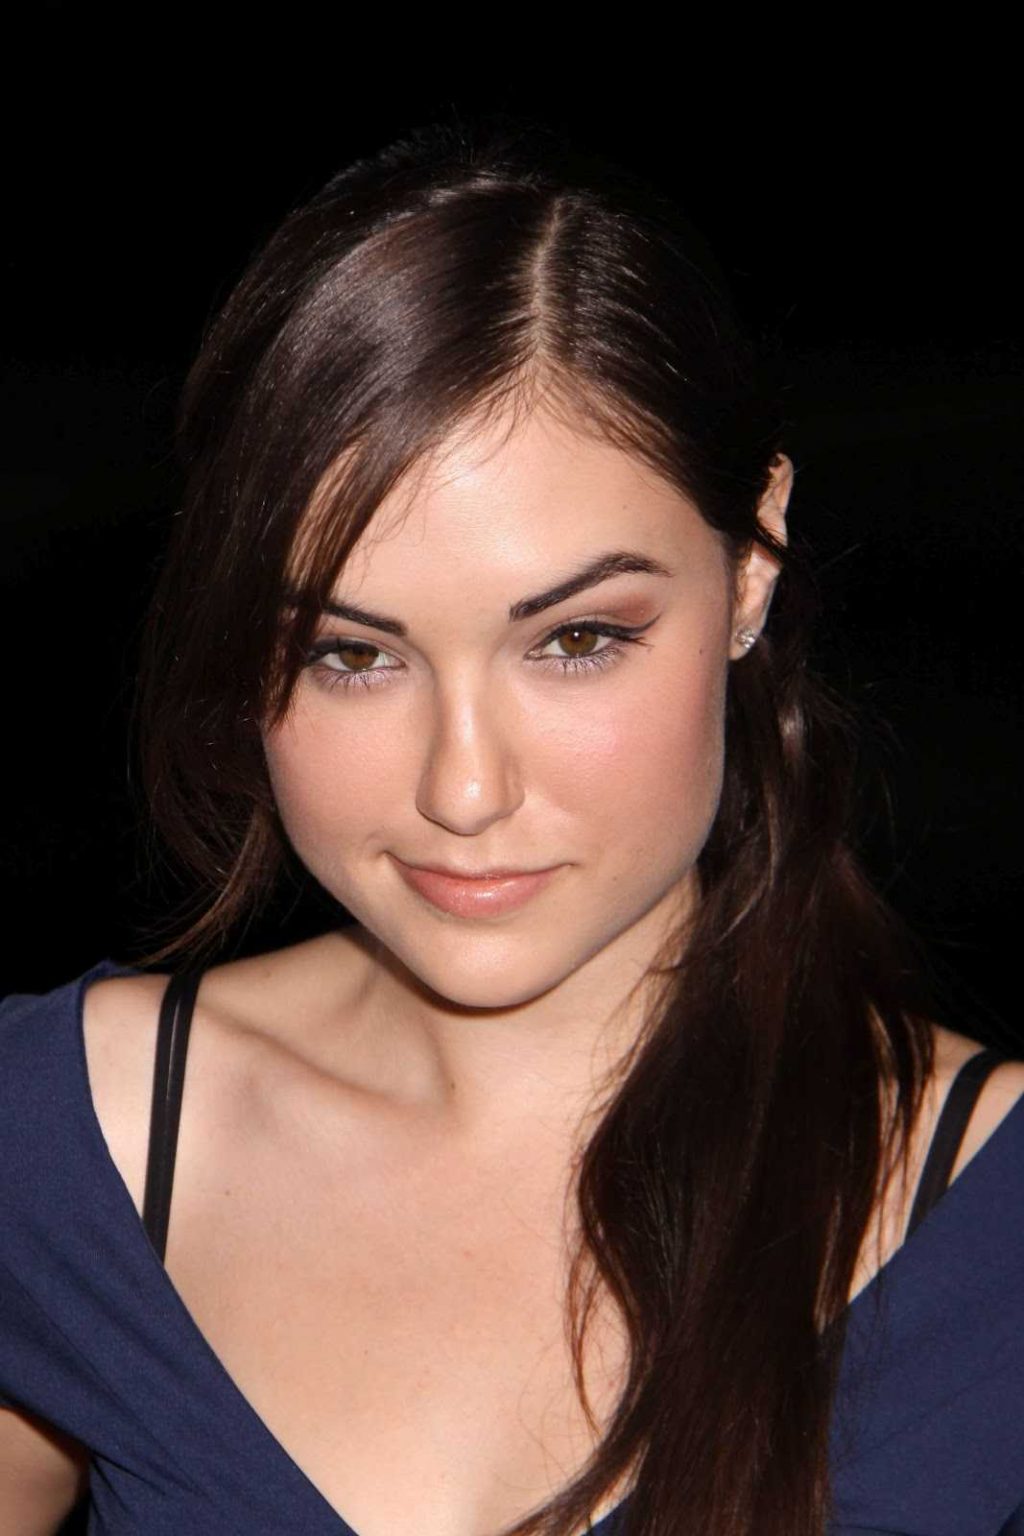 44 Sasha Grey Nude Pictures Can Be Pleasurable And Pleasing To Look At 244